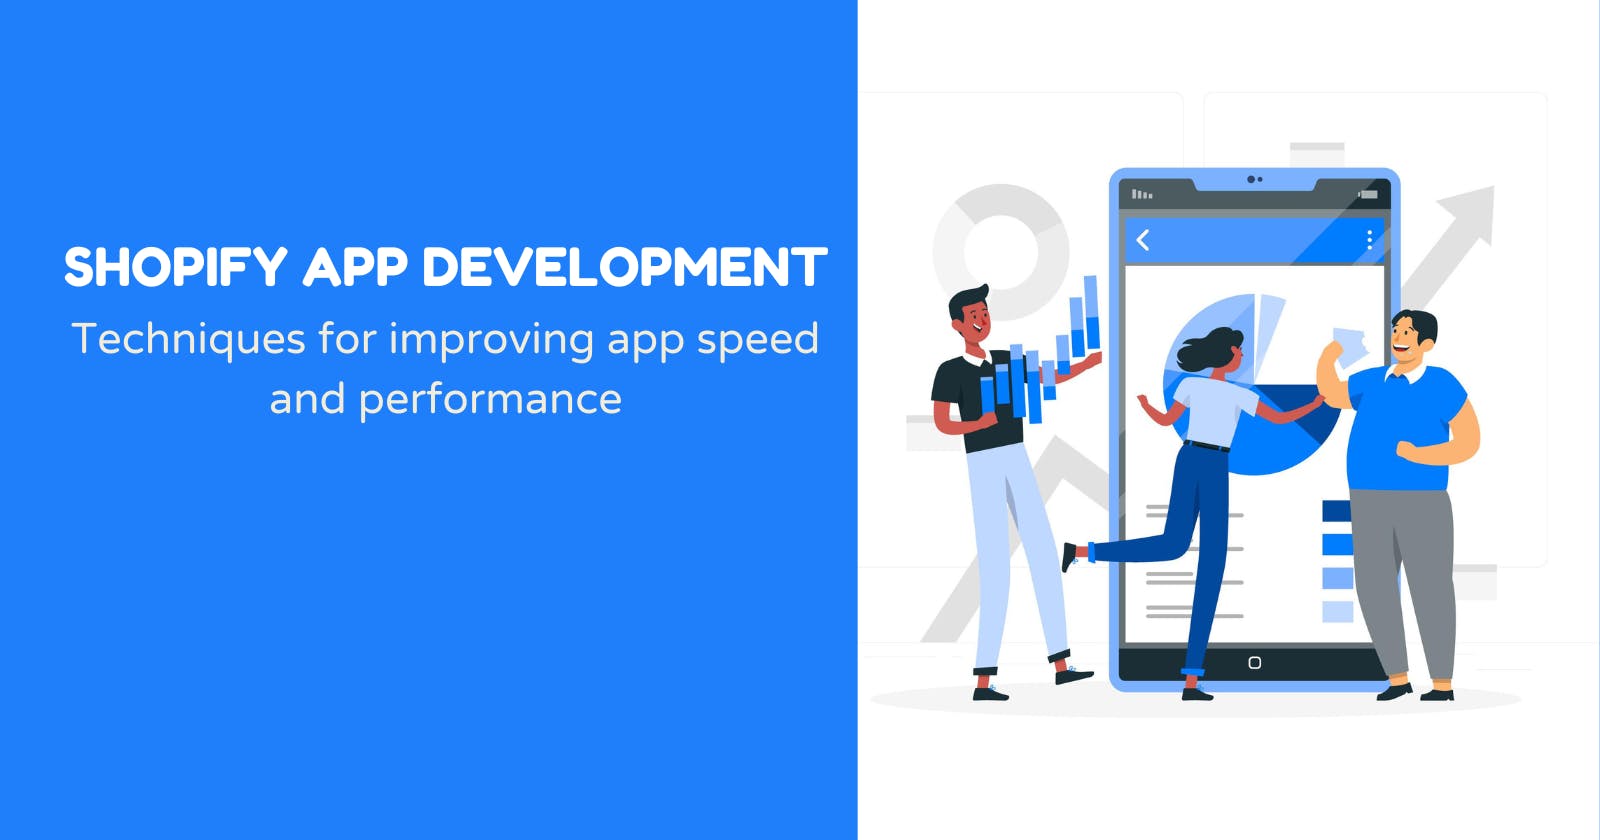 Optimizing Performance in Shopify App Development: Techniques for improving app speed and performance